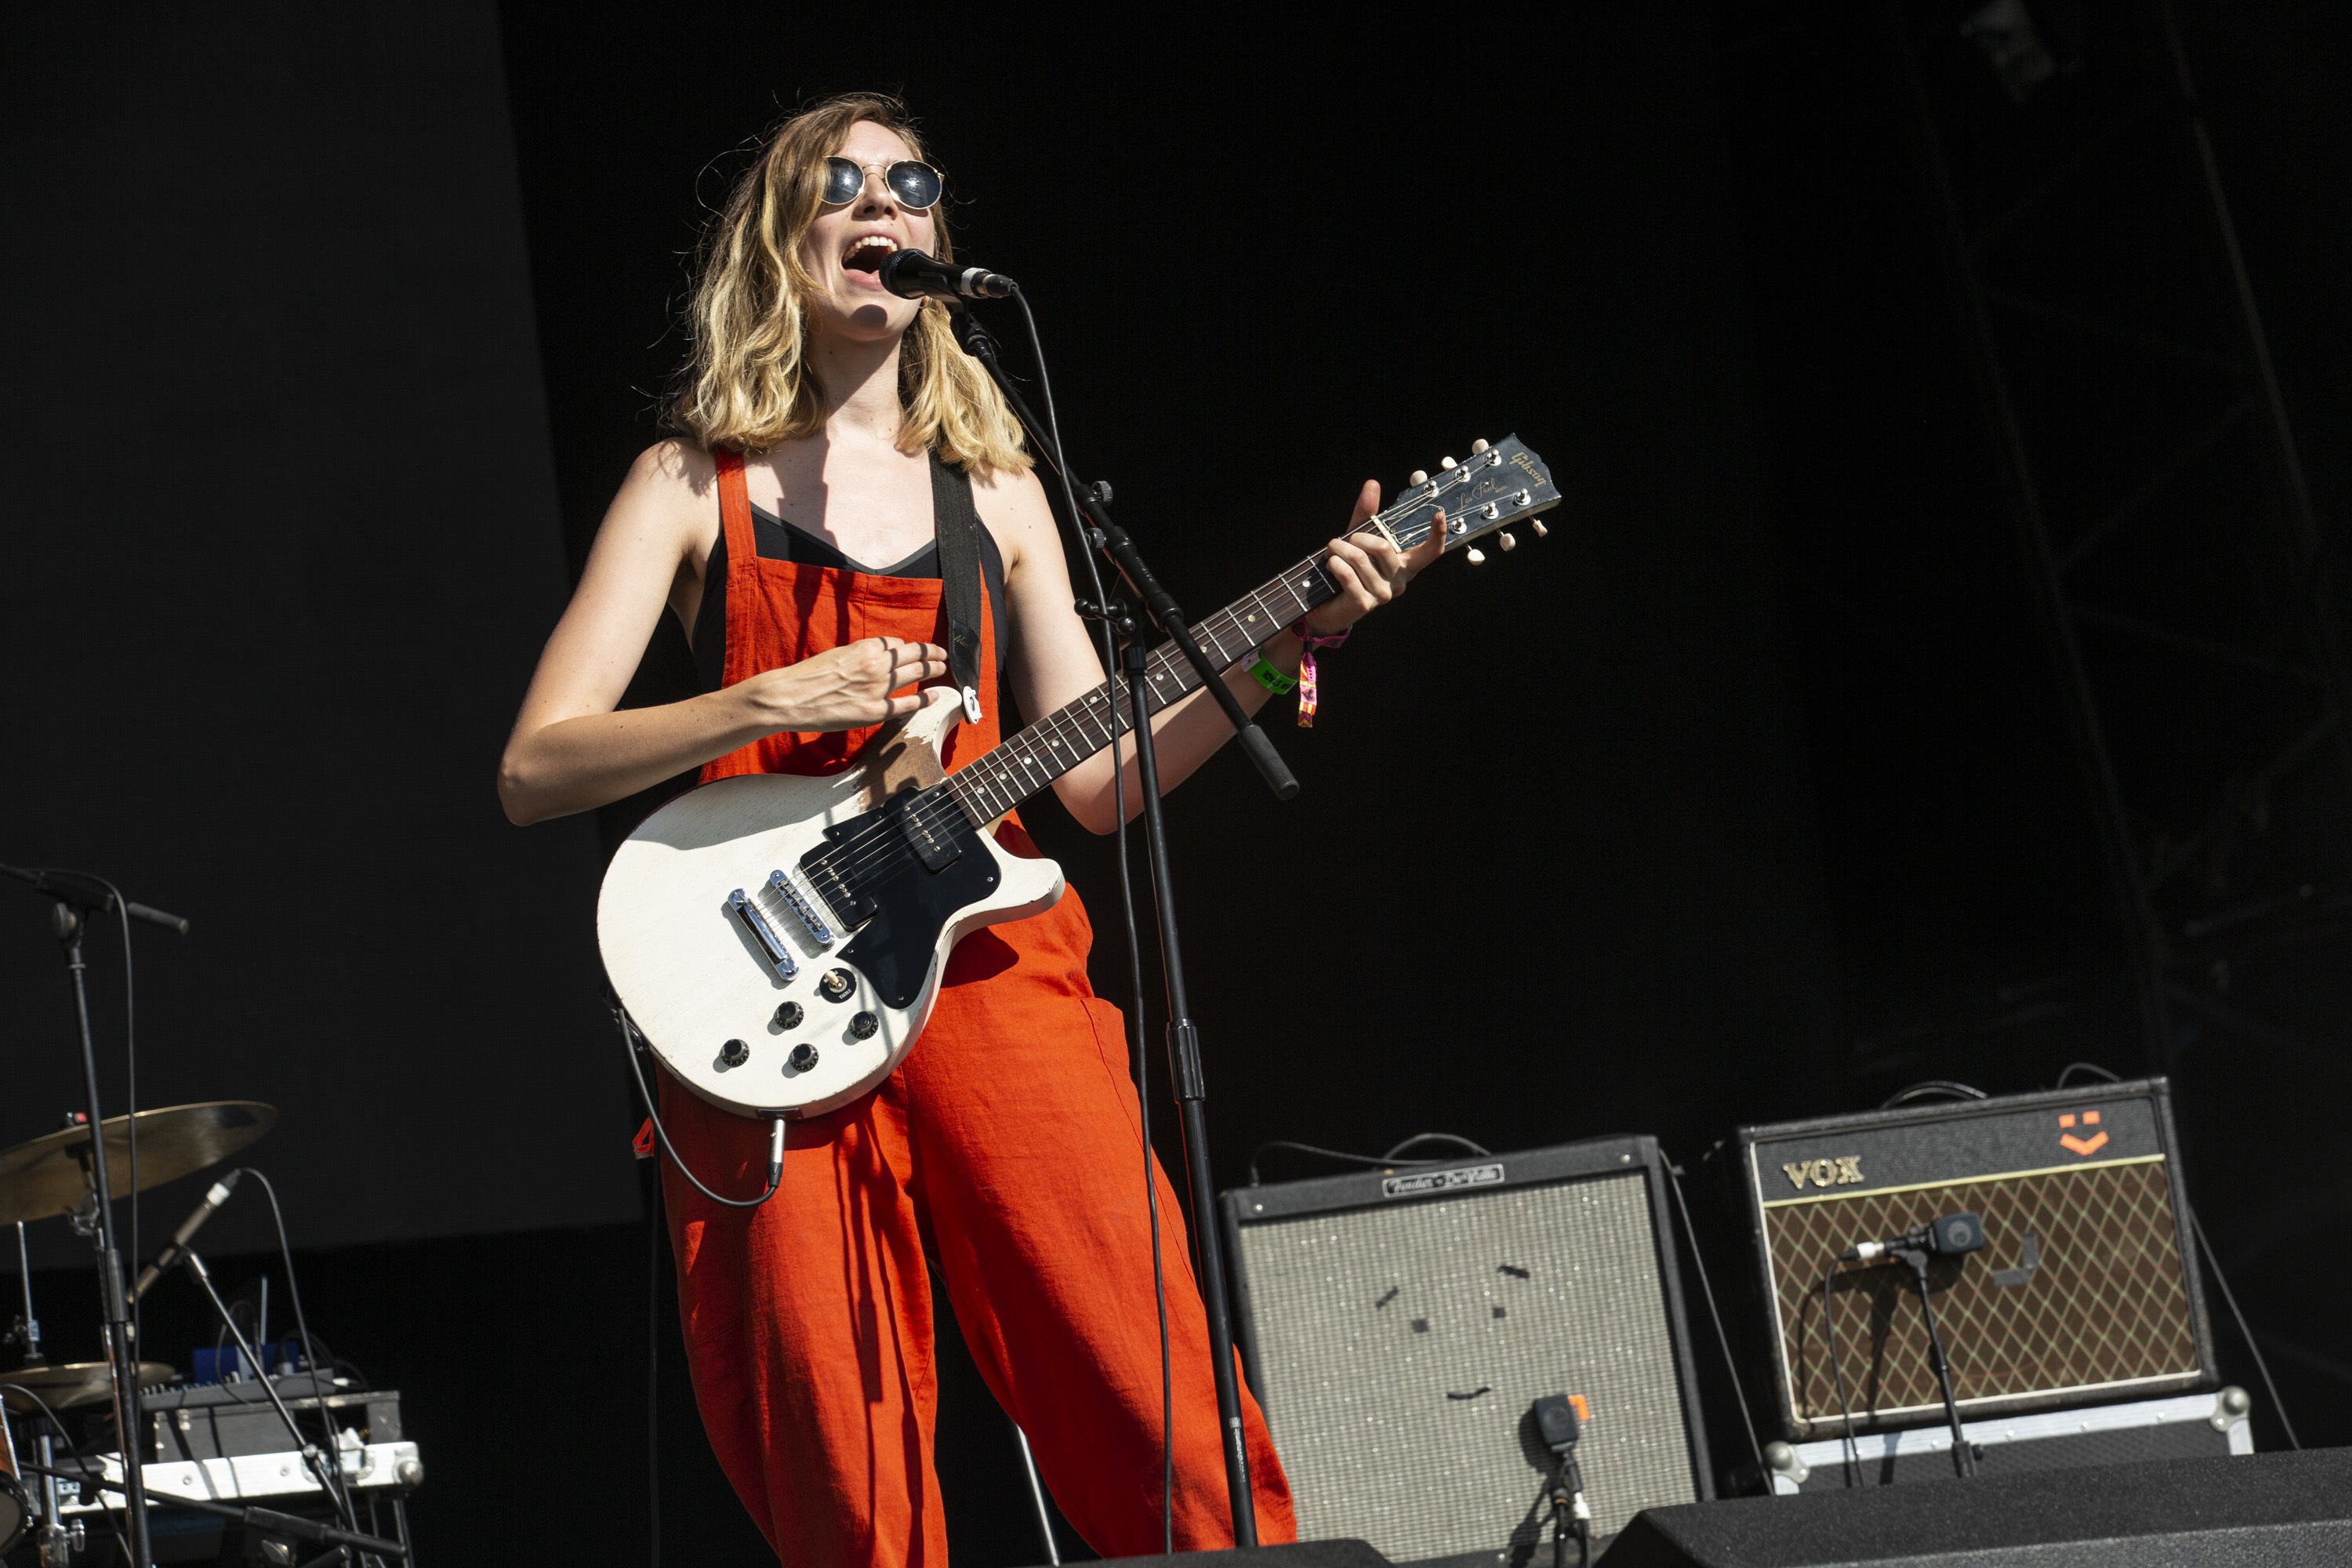 The Big Moon serve up slabs of sunshiney indie rock at Bestival 2018